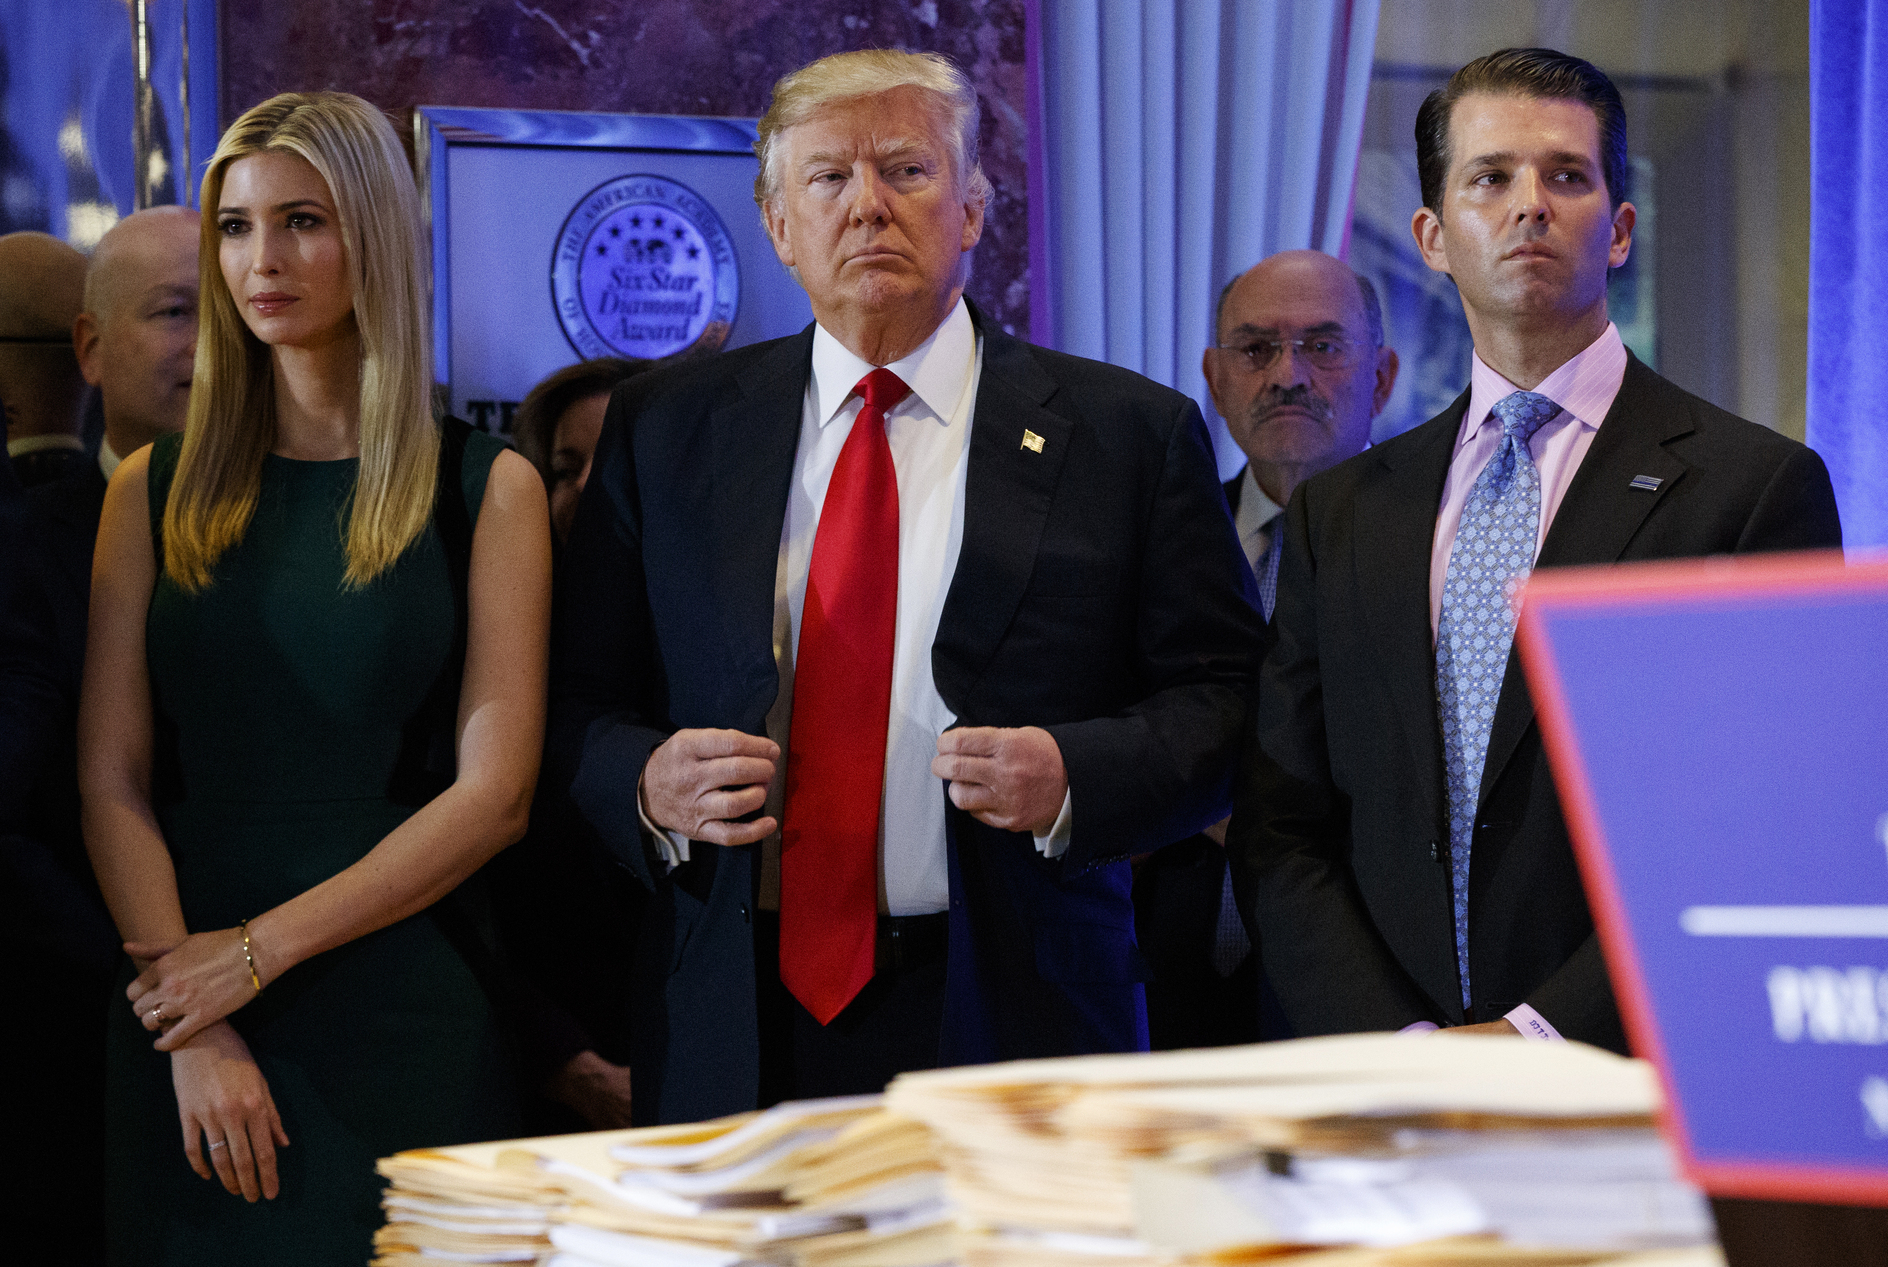 PHOTO: In this Jan. 11, 2017, photo, President-elect Donald Trump, center, stands next to Allen Weisselberg, second from left, Donald Trump Jr., right and Ivanka Trump, left, at a news conference in the lobby of Trump Tower in New York.